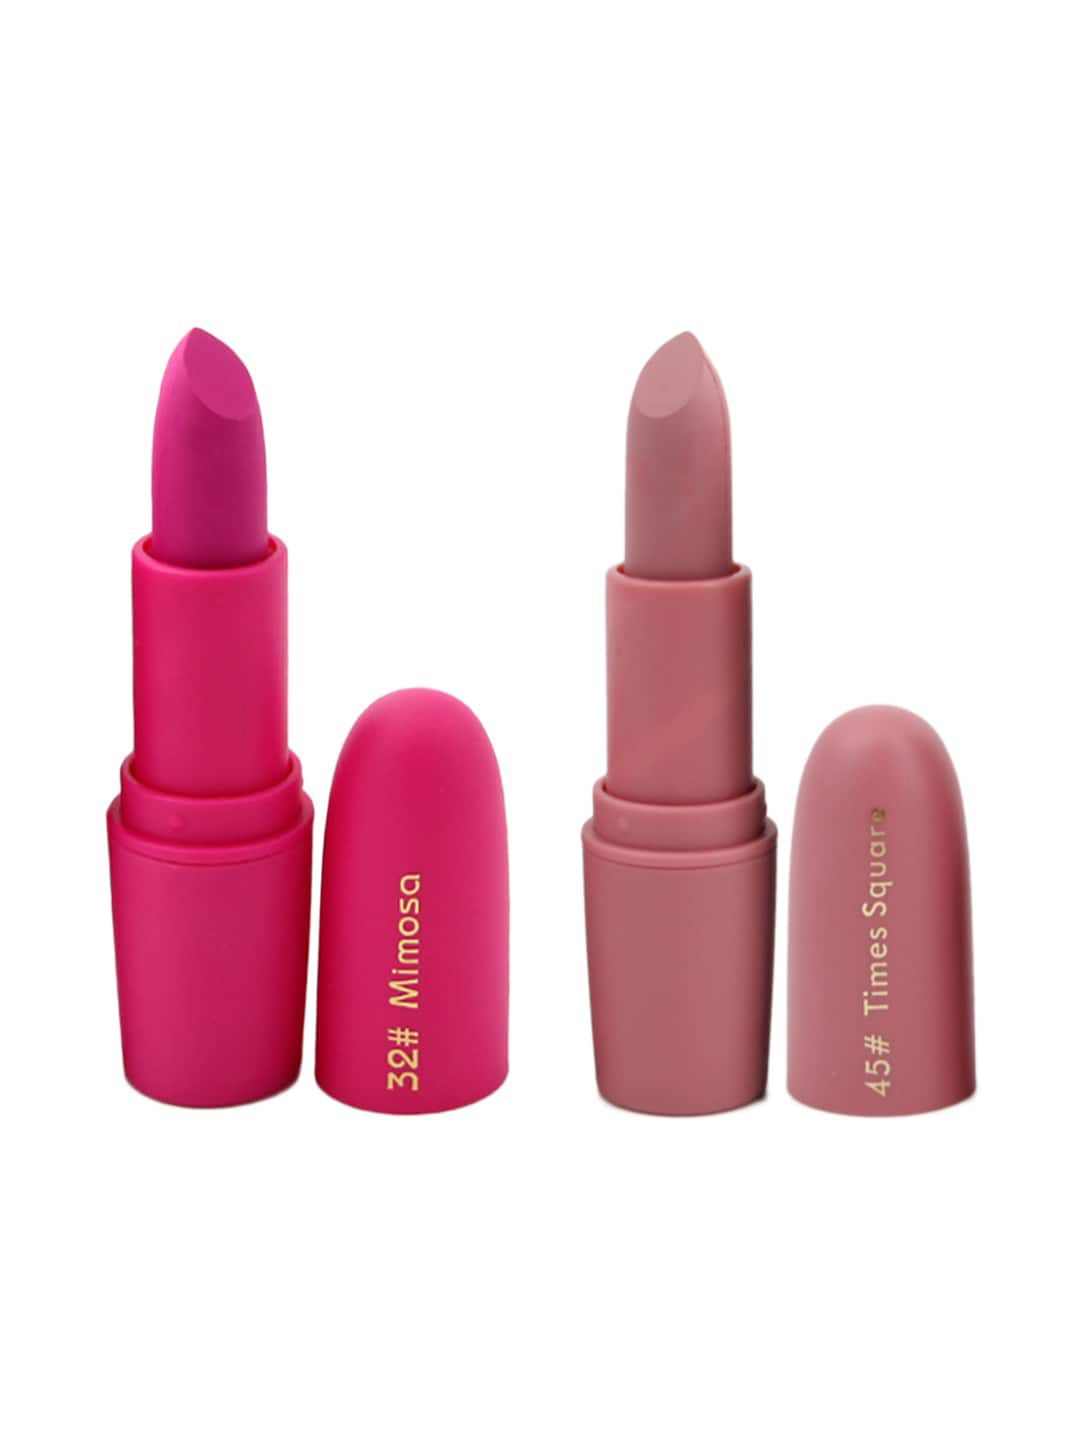 MISS ROSE Set of 2 Matte Creamy Bullet Lipsticks - 32 Mimosa & 45 Times Square Price in India